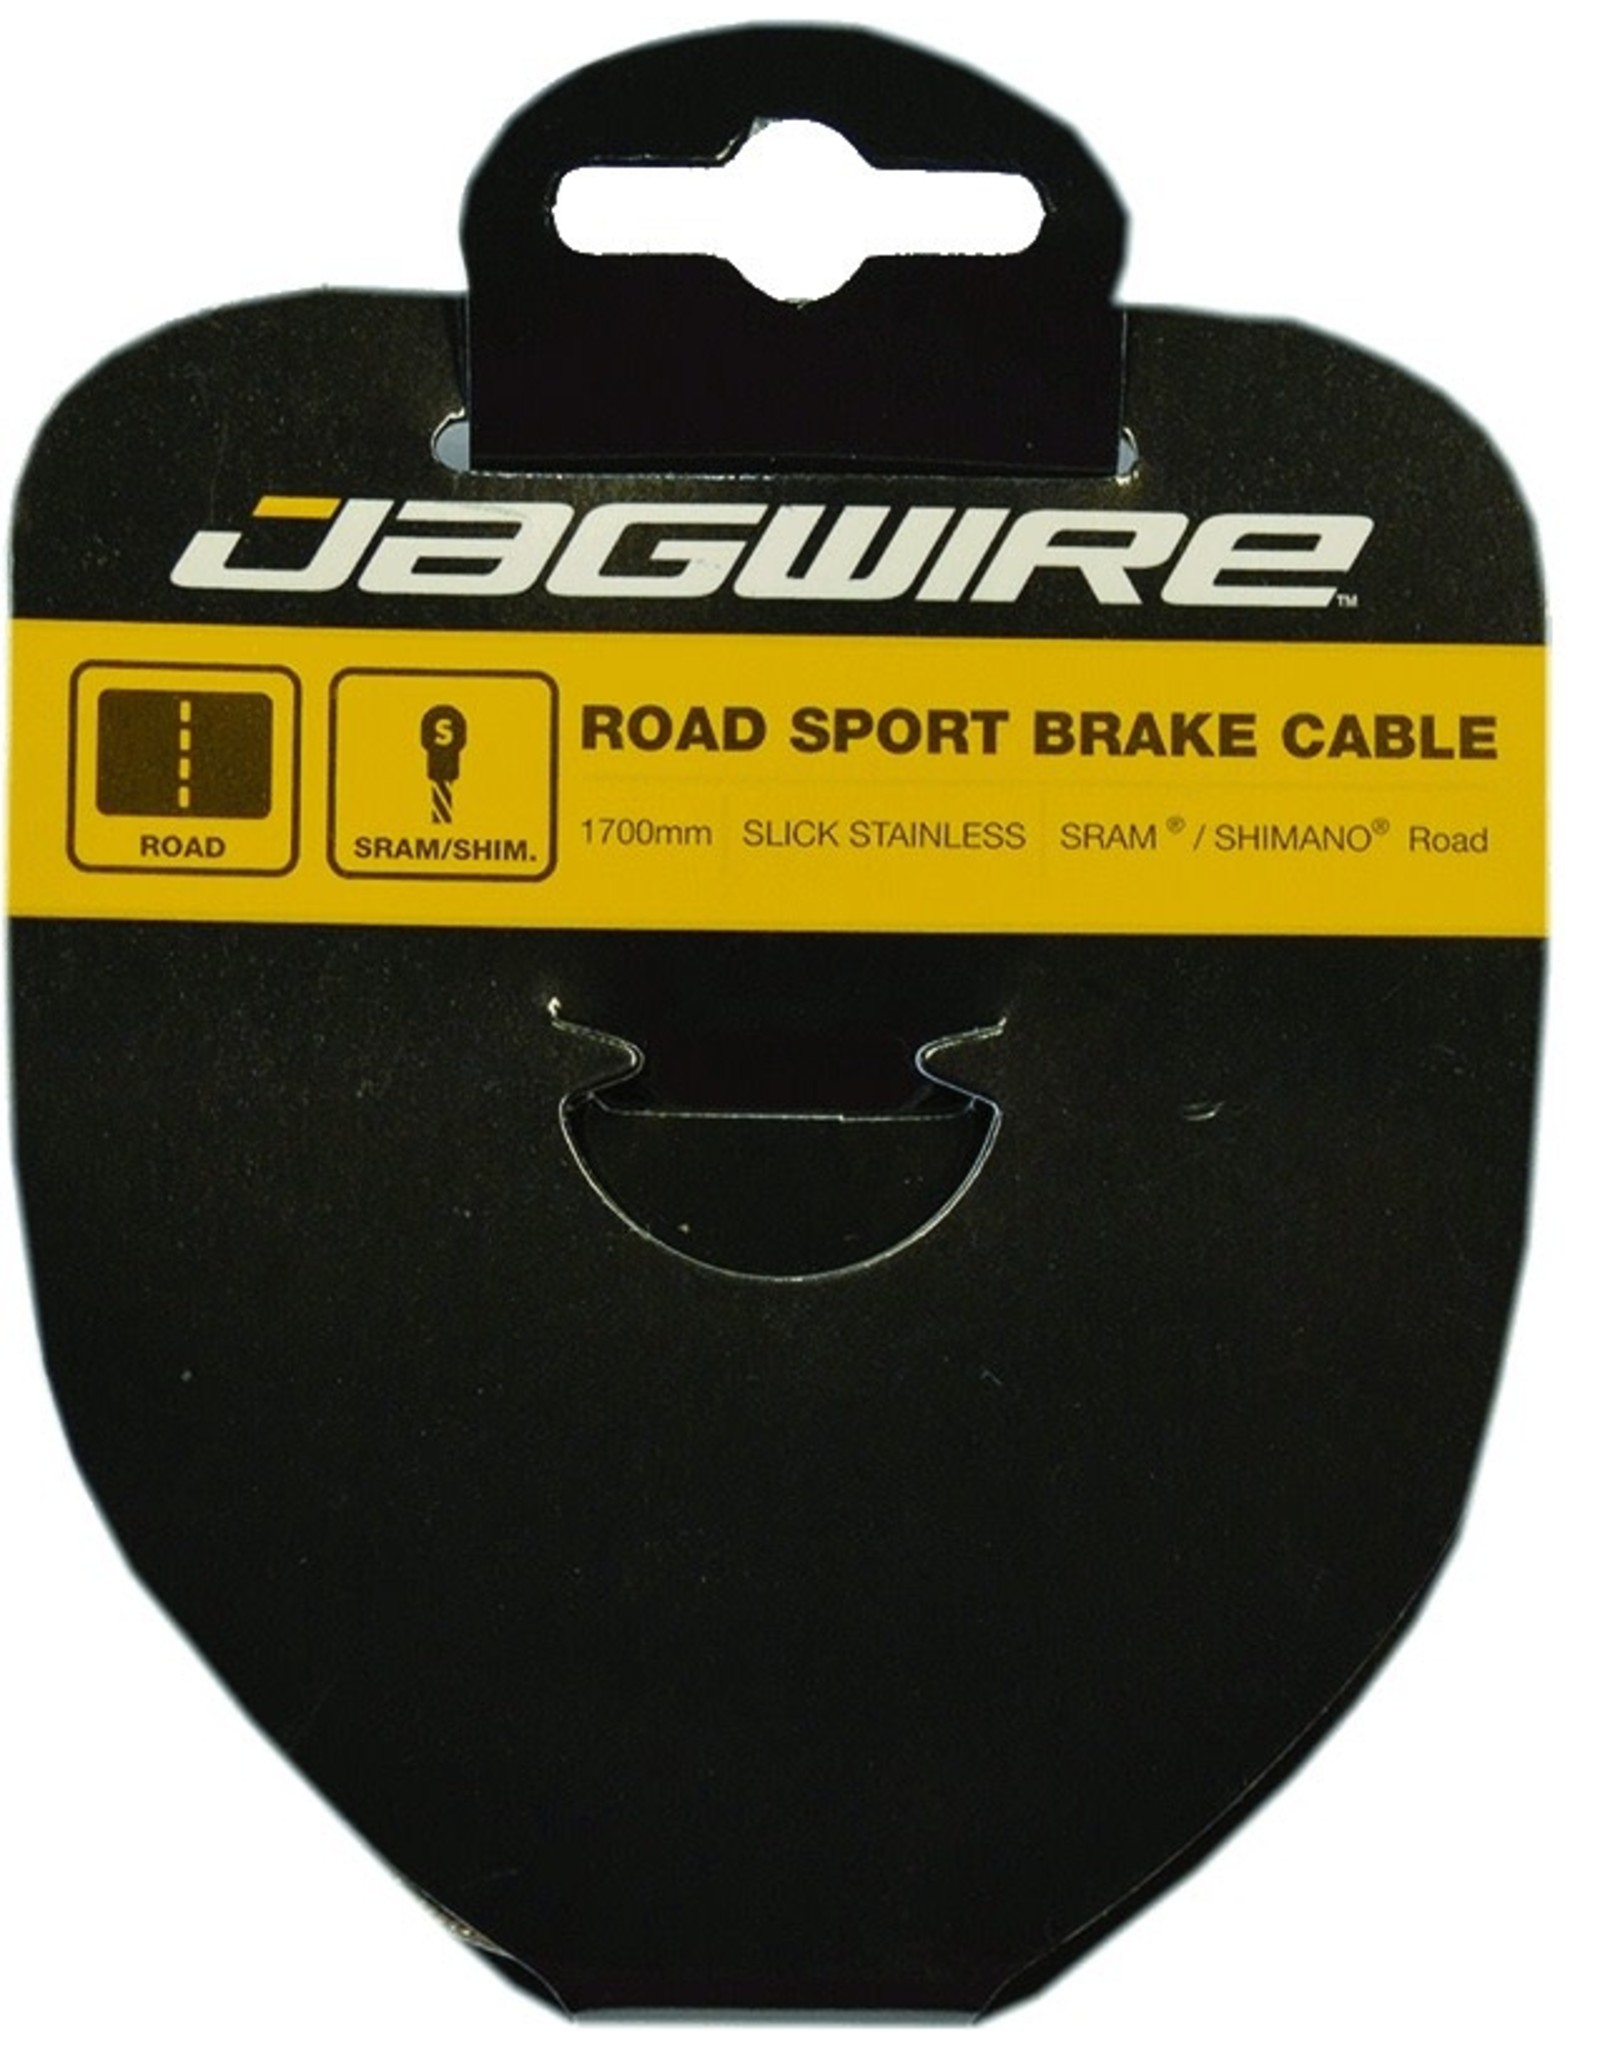 Jagwire Jagwire Road Sport Brake Cable, Slick/Stainless, - Jagwire Road Sport, 1.5x1700mm, Single